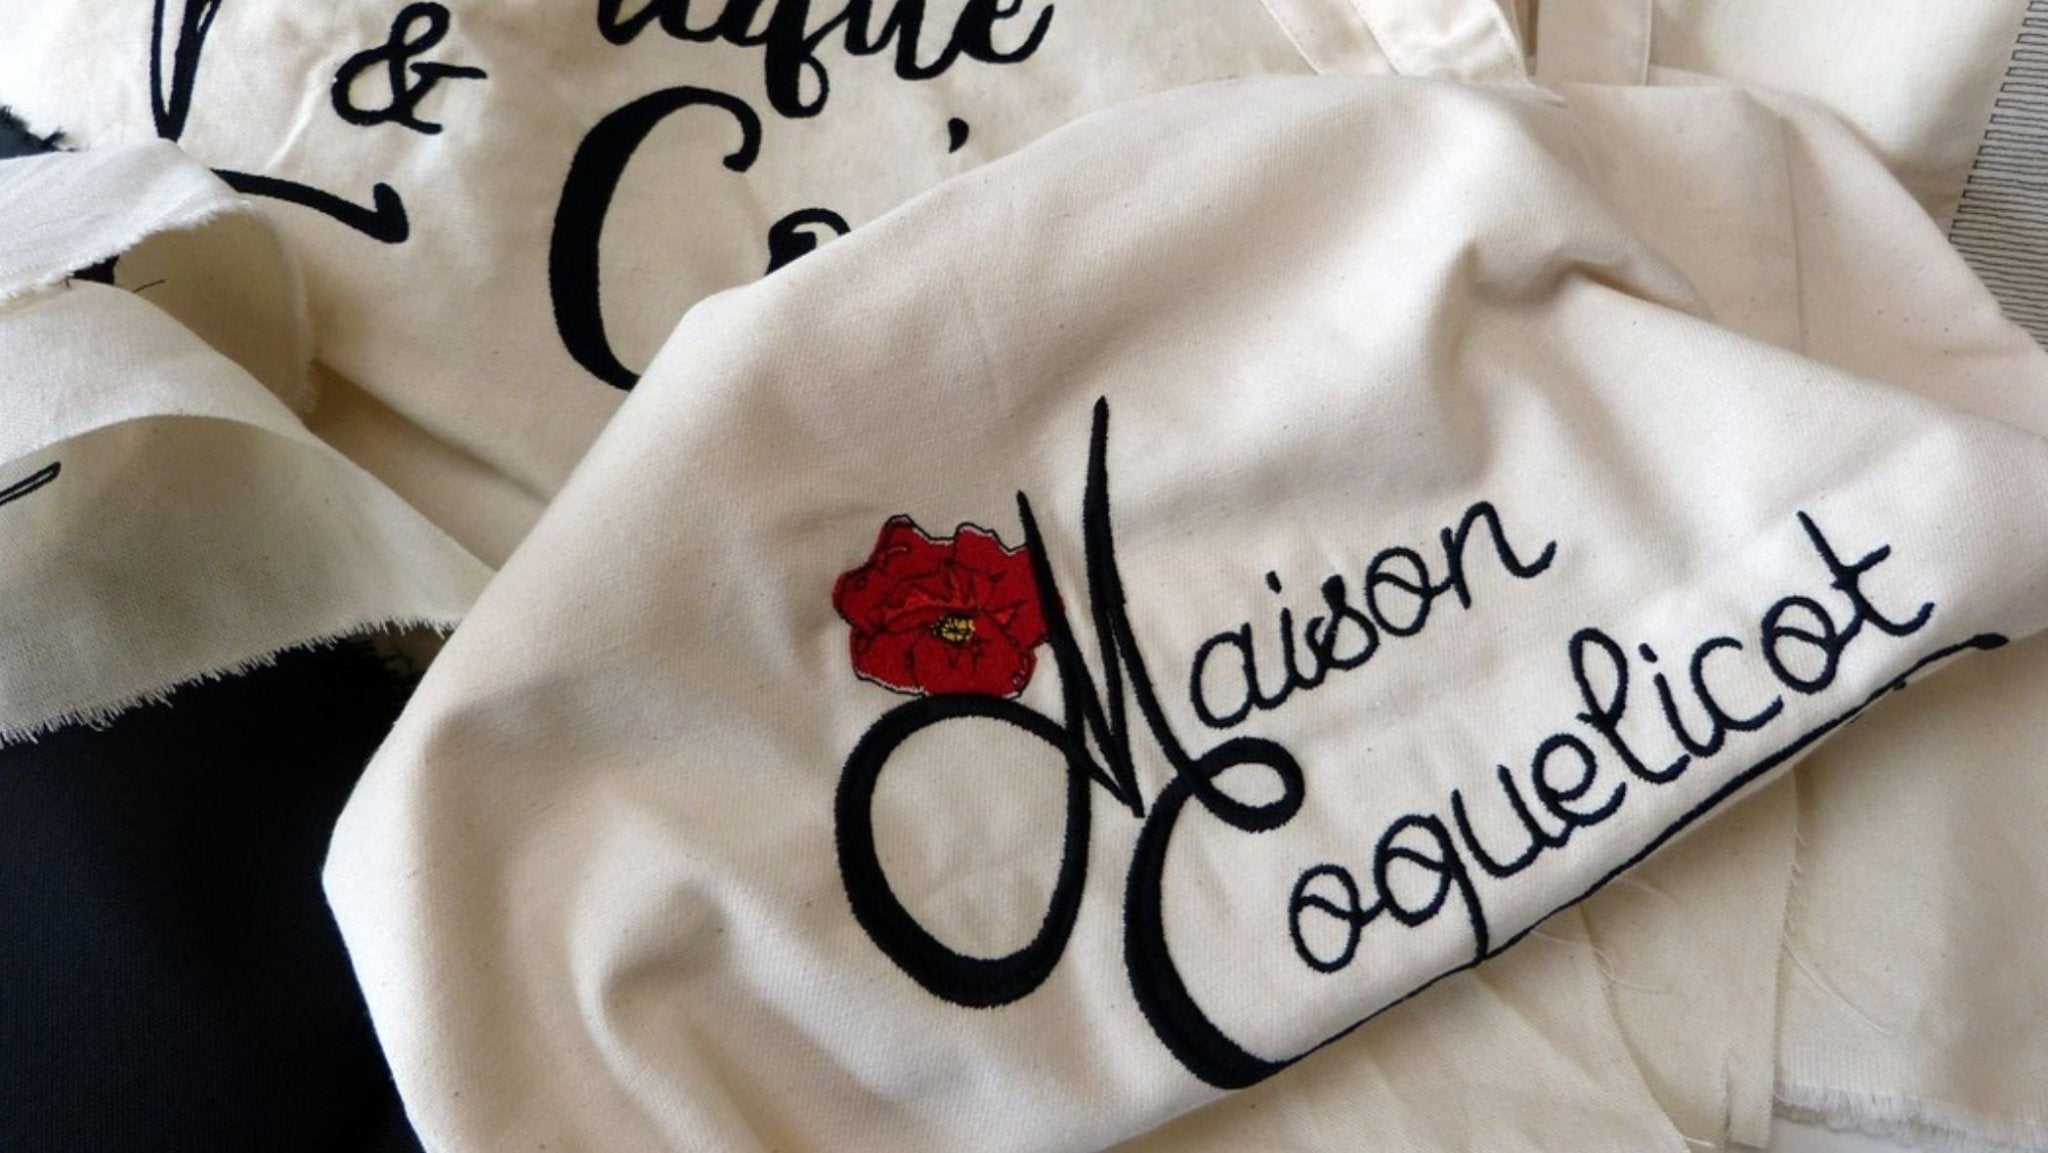 Discover the beautiful world of Maison Coquelicot - French Beauty Co.